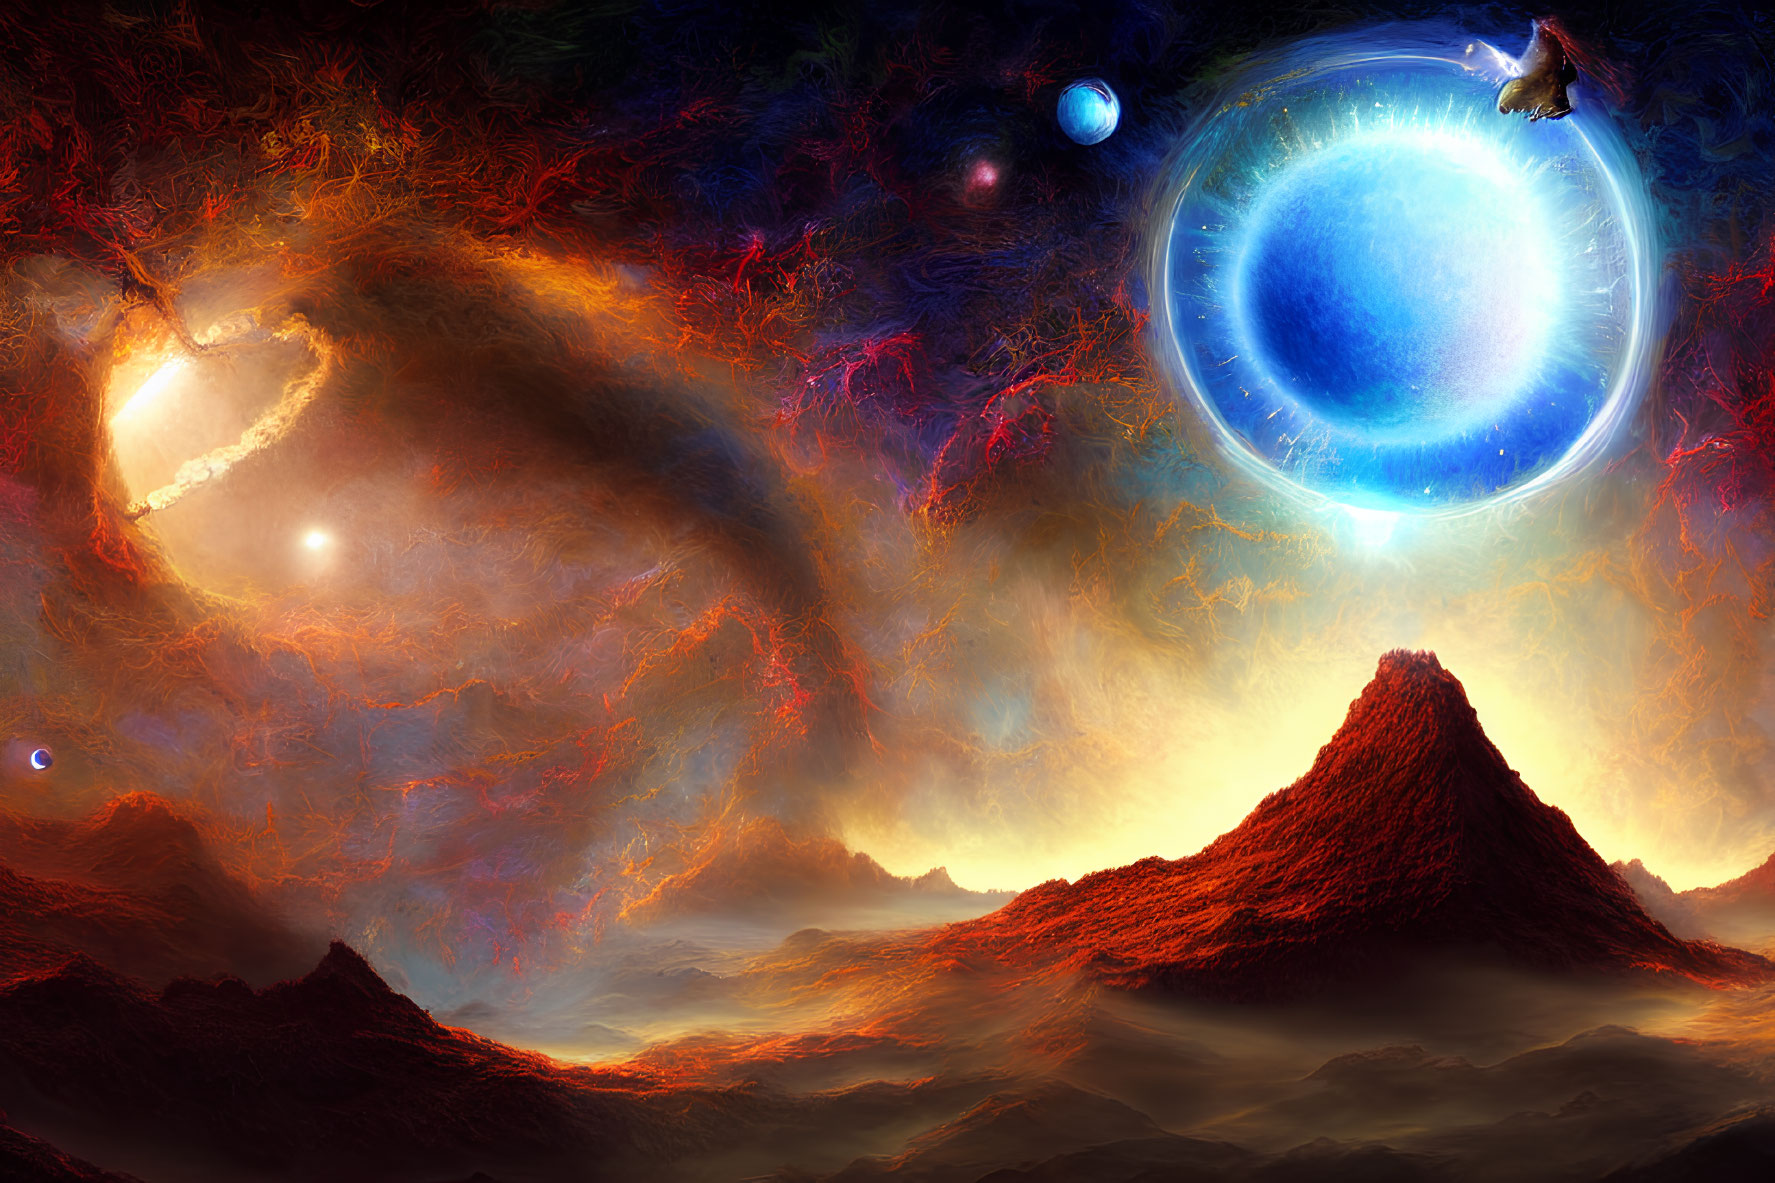 Colorful cosmic landscape with volcano, nebulae, and glowing portal.